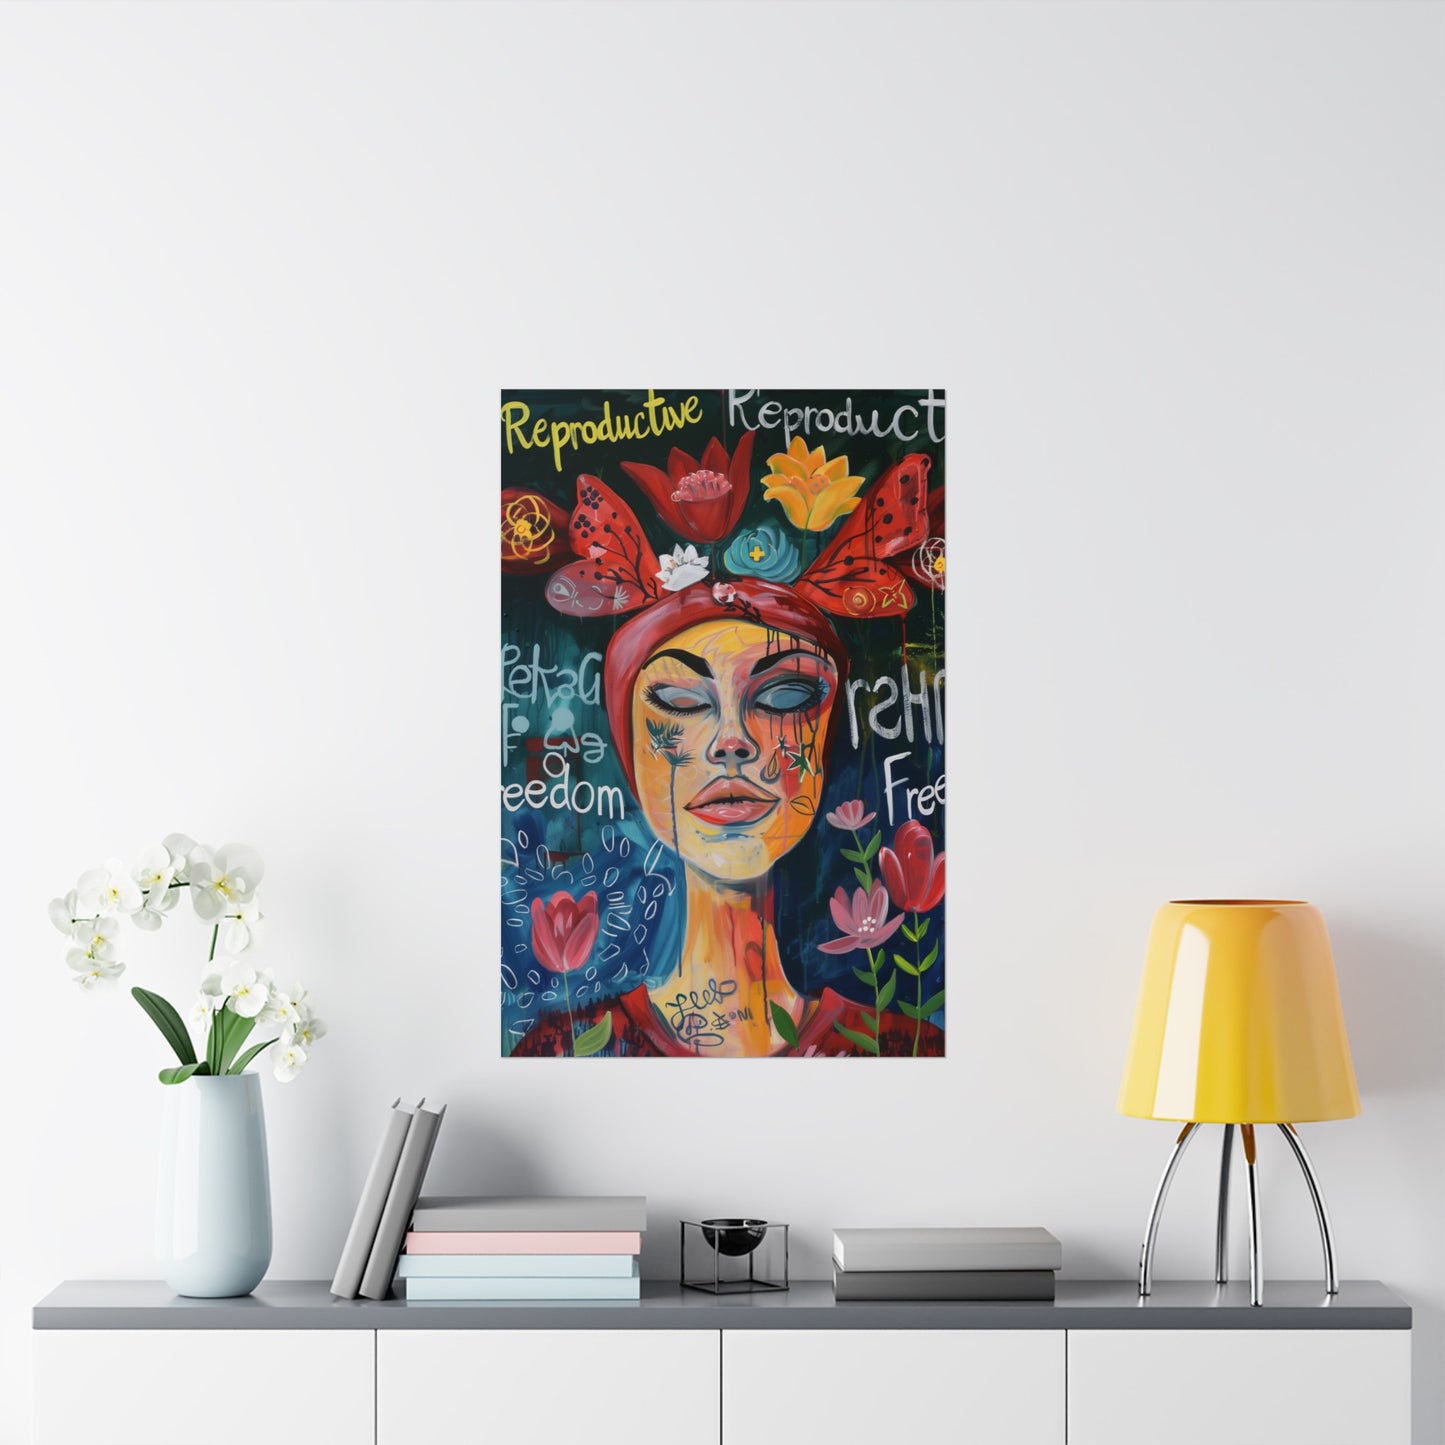 Reproductive Freedom Matte Poster Women's Rights Political Wall Art for Home Office Dorm Decor